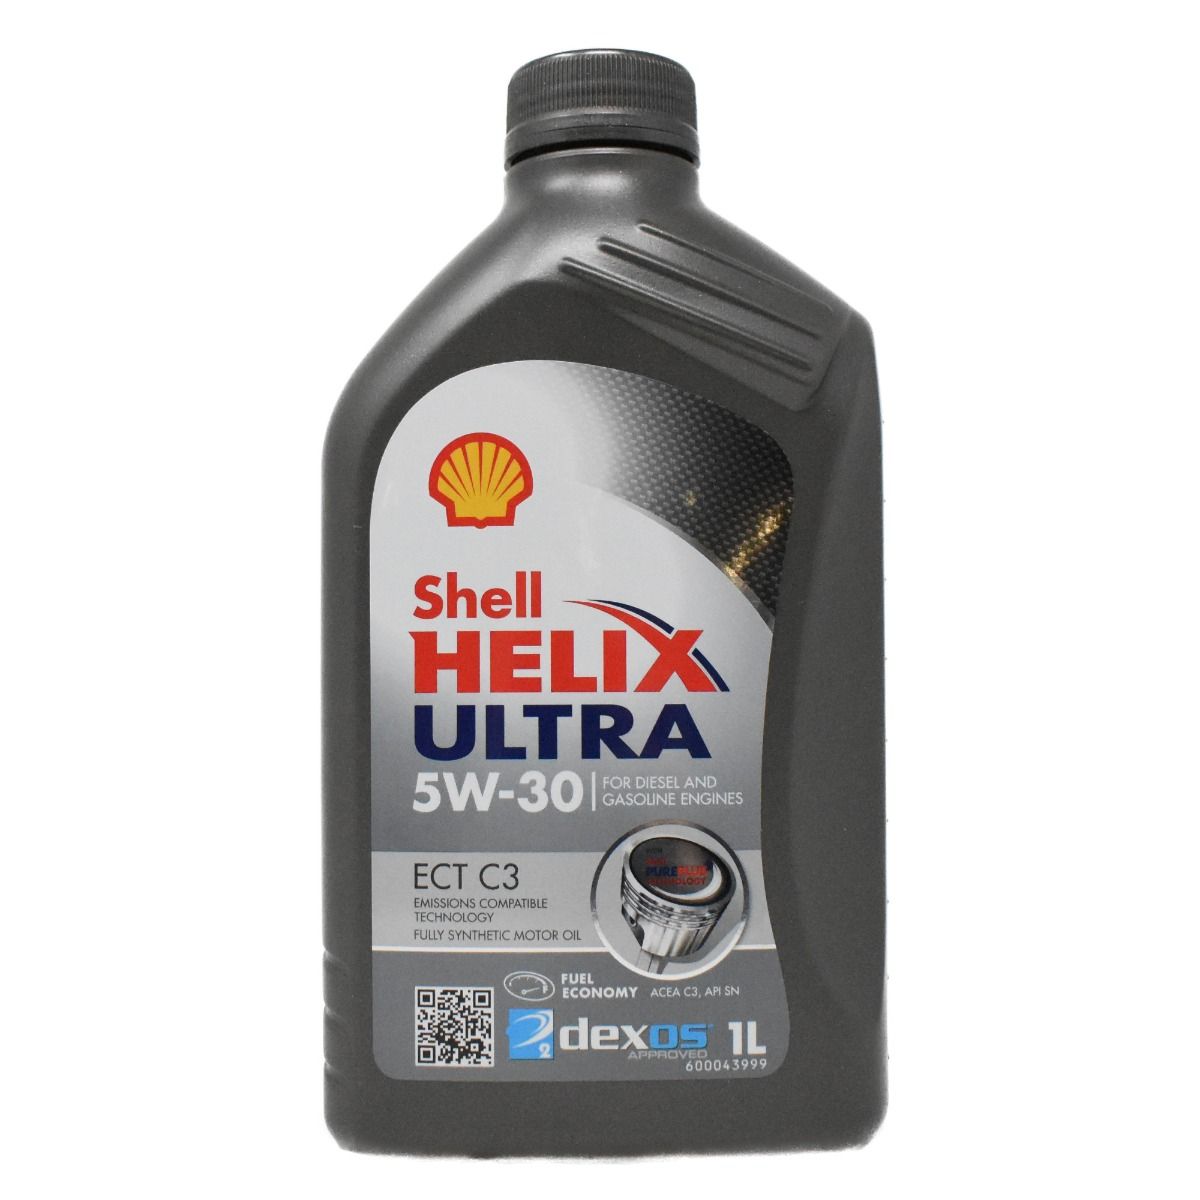 Shell Helix Ultra 5W-30 ECT at ATO24